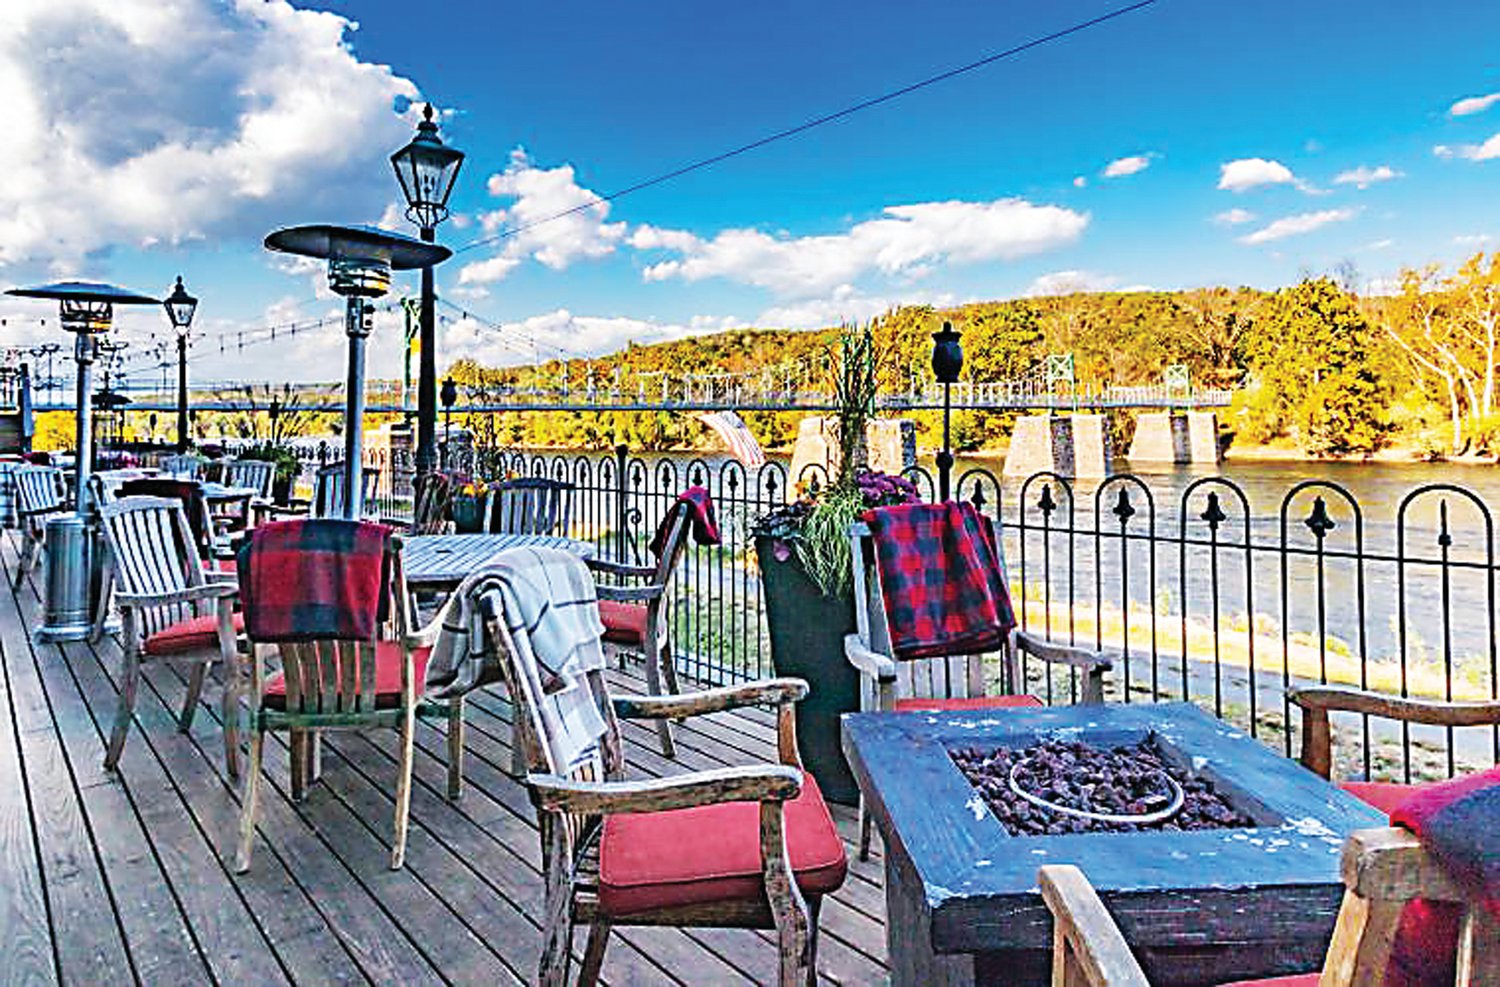 Diners at the Black Bass Hotel in Lumberville have an expansive view of the Delaware River.